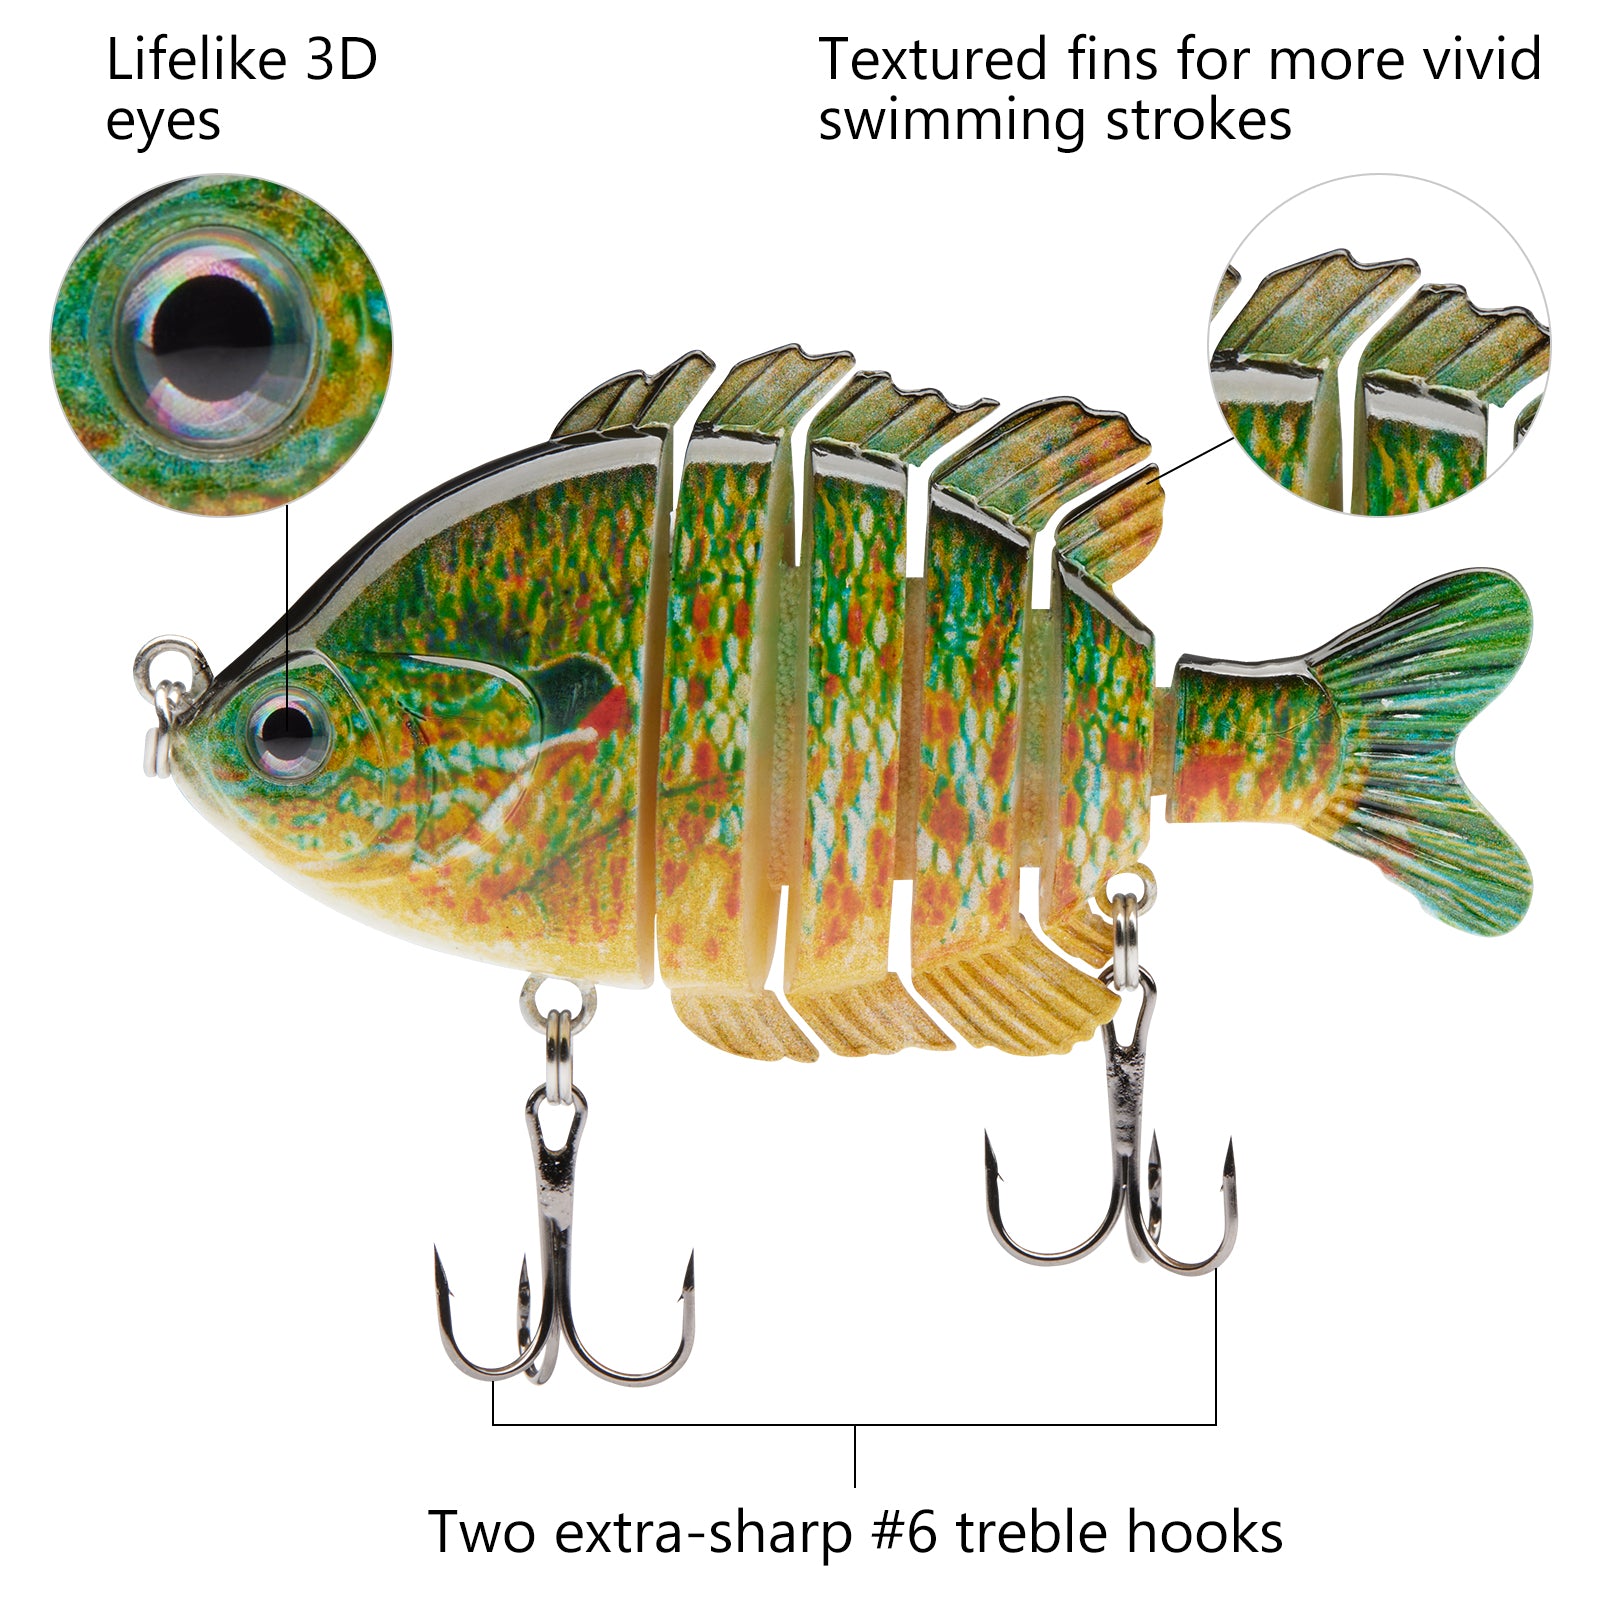 3Pcs Fishing Lures for Bass, Topwater Trout Lures, Multi Jointed